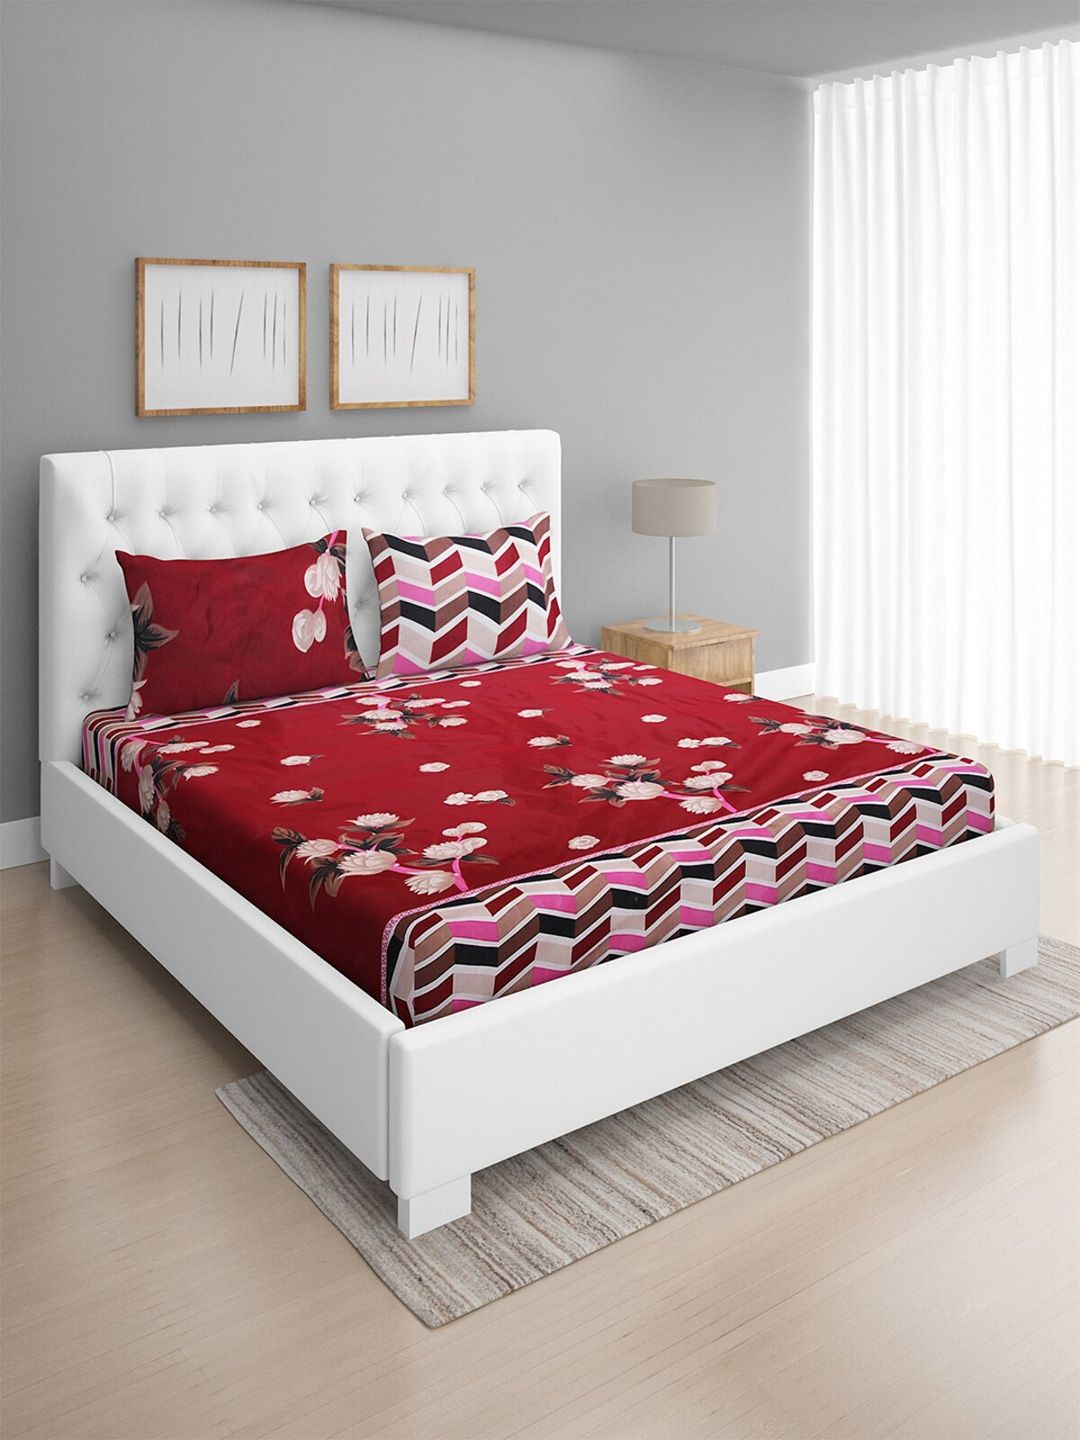 ROMEE Maroon & Pink Floral 144 TC Cotton Double Bedsheet with 2 Pillow Covers Price in India